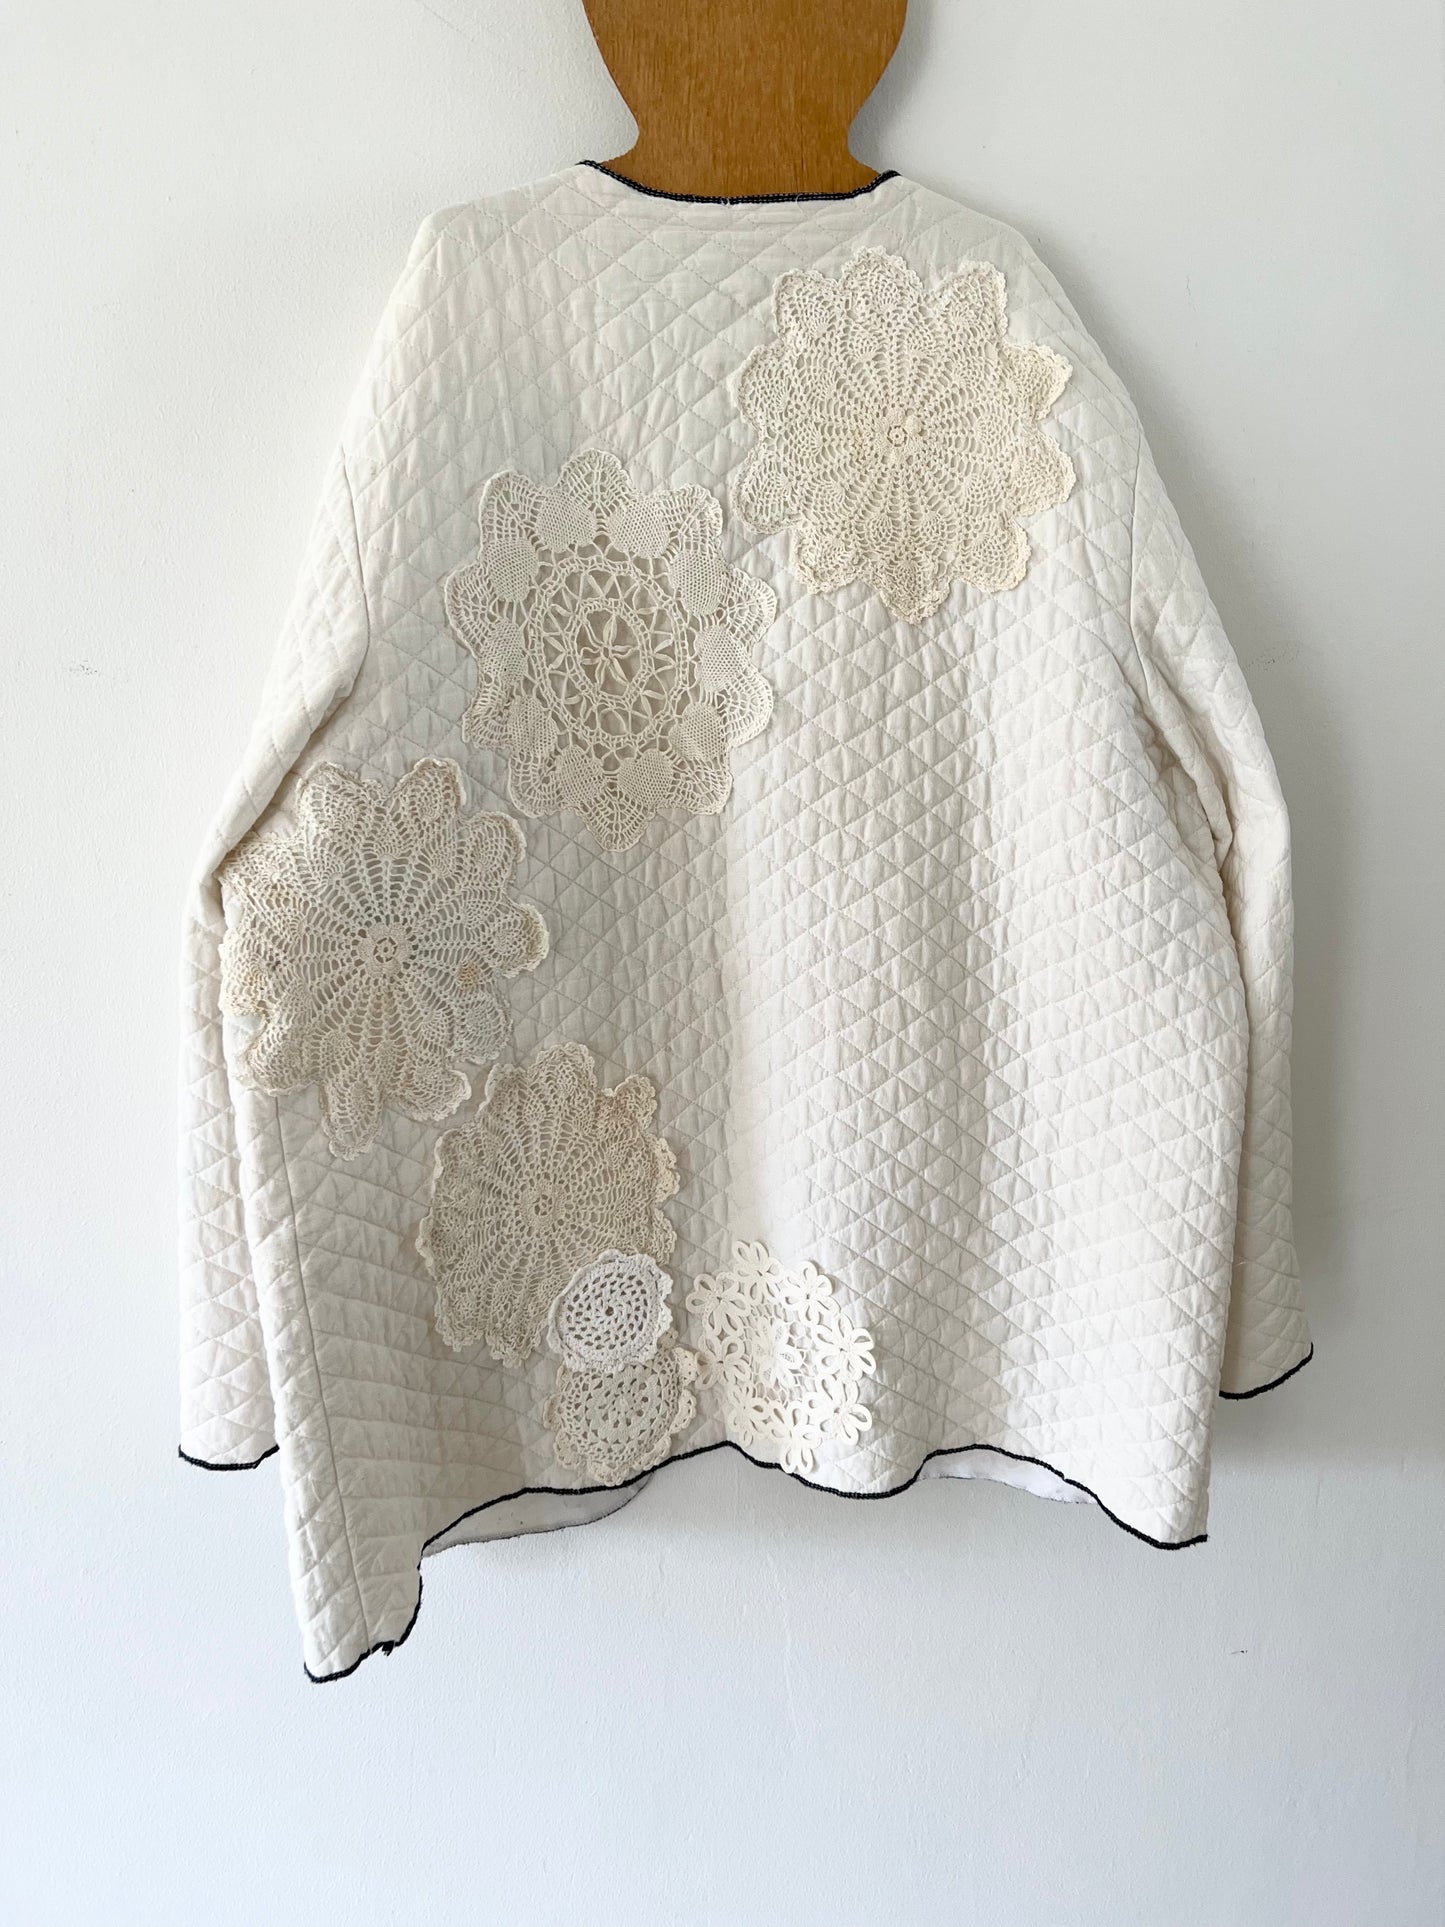 Doilies N Cows Reworked Jacket